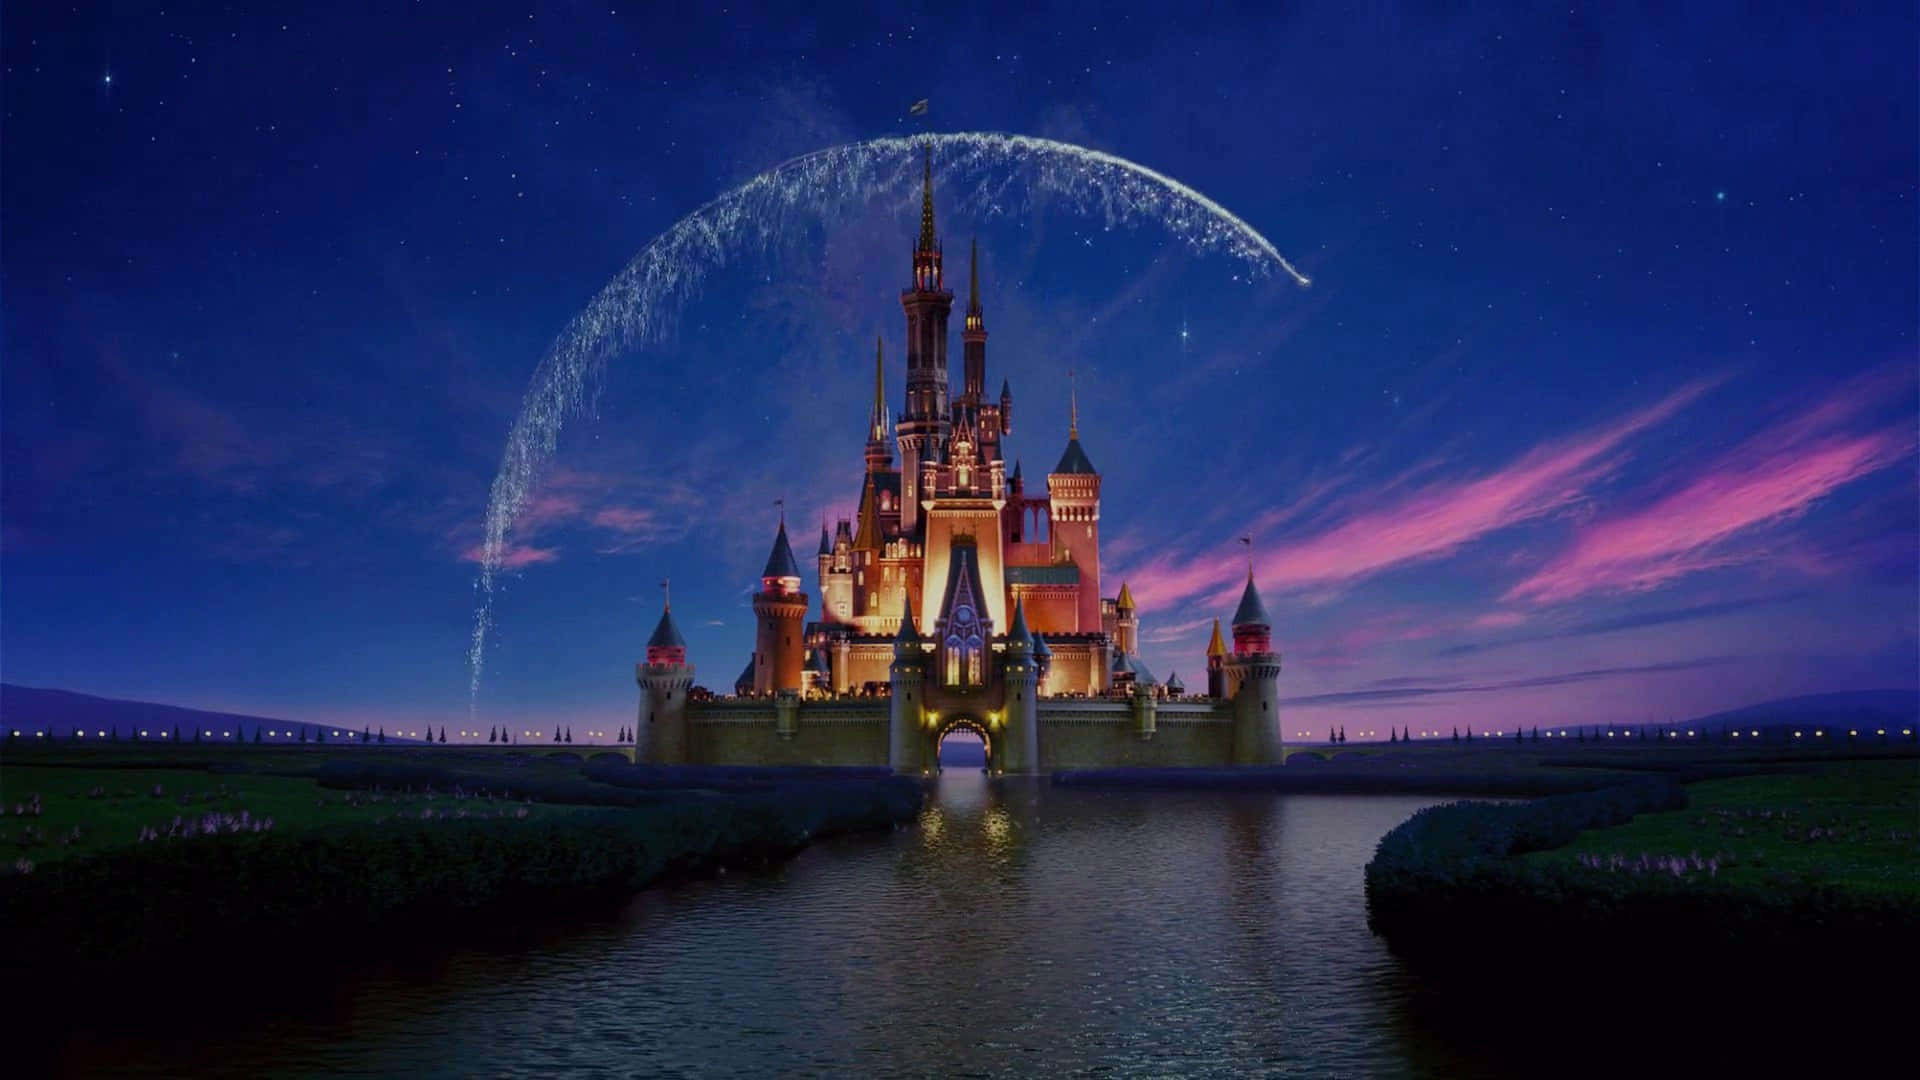 Enjoy this Aesthetic Disney Laptop wallpaper and feel like part of a magical world. Wallpaper